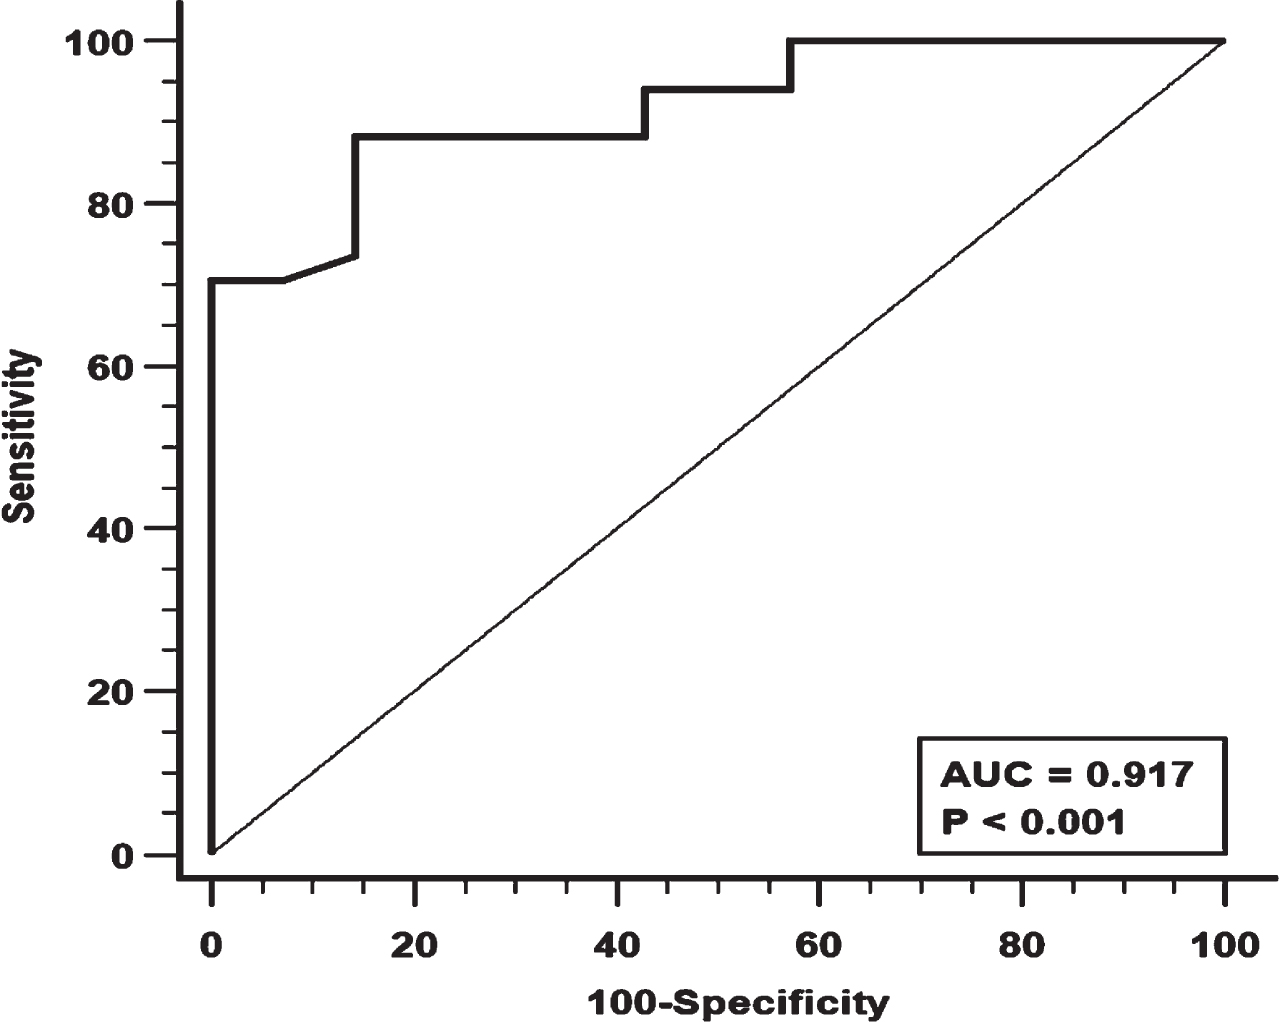 Receiver Operating Characteristics (ROC) analysis for Maximal Inspiratory Pressure (MIP) and its diagnostic performance. AUC = area under the curve.